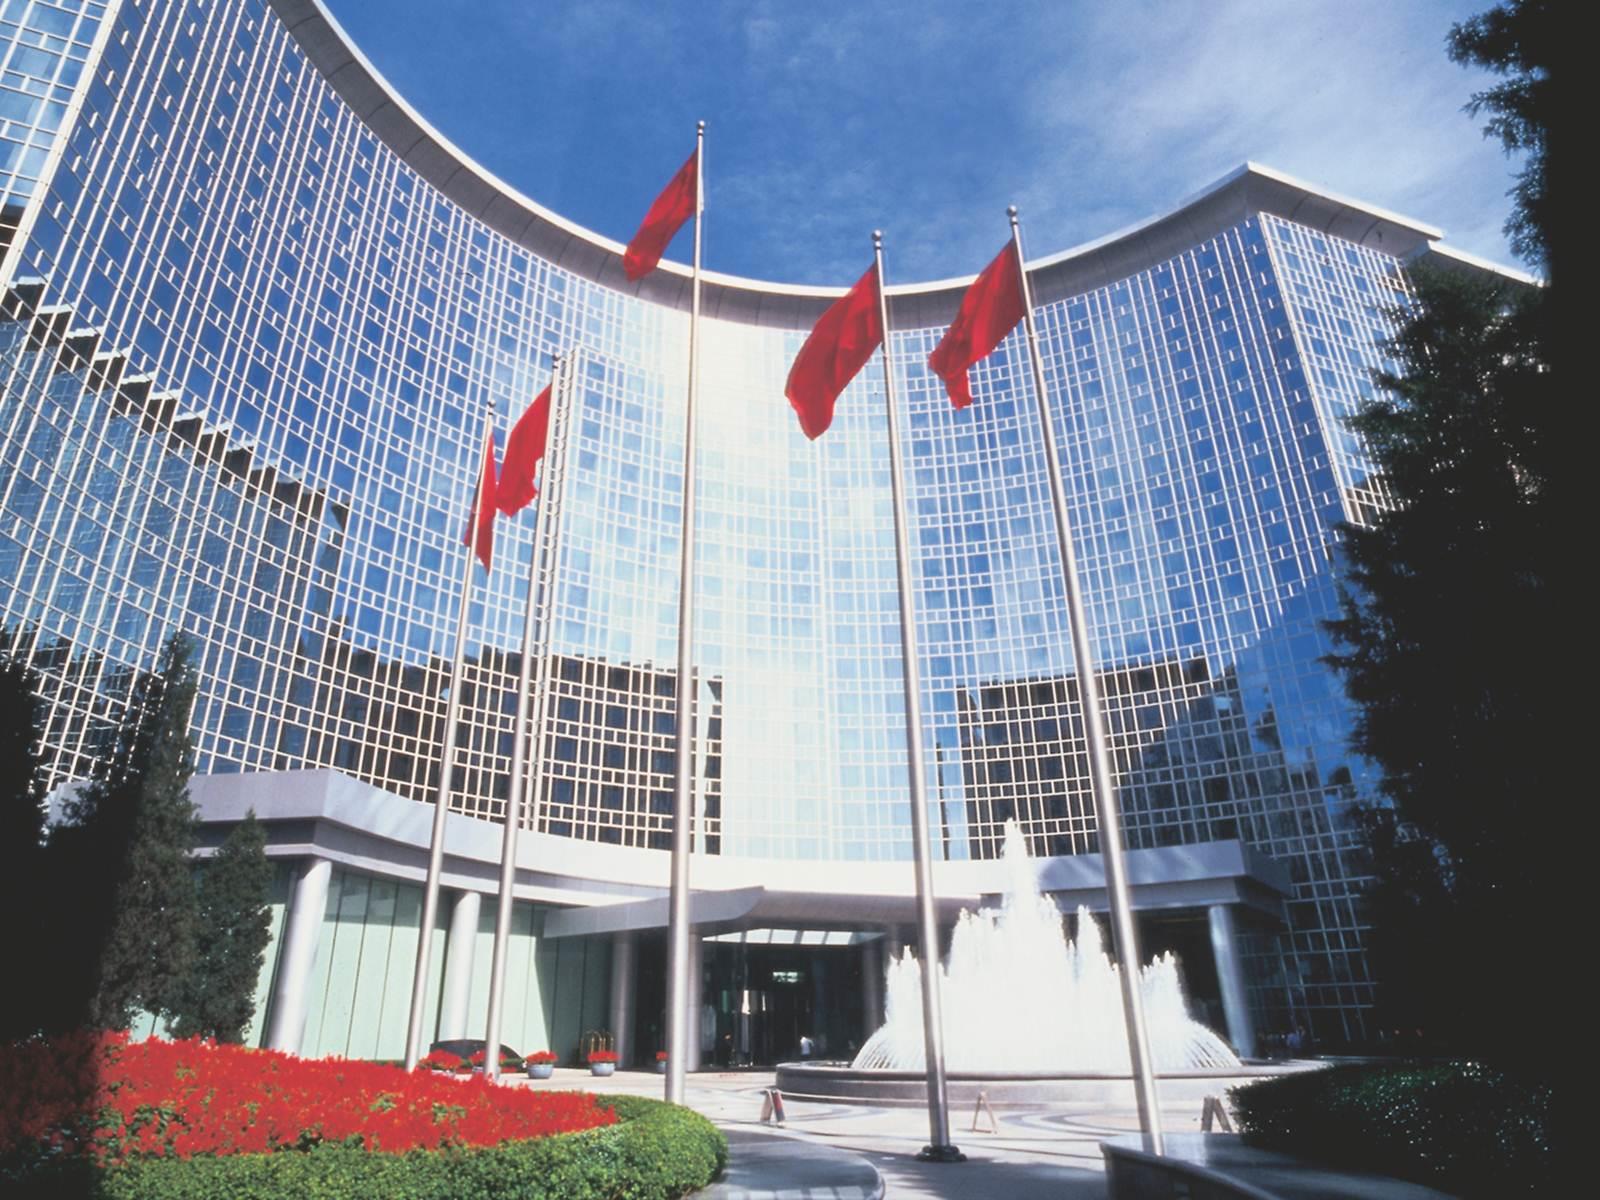 Grand Hyatt Beijing Hotel Beijing FAQ 2017, What facilities are there in Grand Hyatt Beijing Hotel Beijing 2017, What Languages Spoken are Supported in Grand Hyatt Beijing Hotel Beijing 2017, Which payment cards are accepted in Grand Hyatt Beijing Hotel Beijing , Beijing Grand Hyatt Beijing Hotel room facilities and services Q&A 2017, Beijing Grand Hyatt Beijing Hotel online booking services 2017, Beijing Grand Hyatt Beijing Hotel address 2017, Beijing Grand Hyatt Beijing Hotel telephone number 2017,Beijing Grand Hyatt Beijing Hotel map 2017, Beijing Grand Hyatt Beijing Hotel traffic guide 2017, how to go Beijing Grand Hyatt Beijing Hotel, Beijing Grand Hyatt Beijing Hotel booking online 2017, Beijing Grand Hyatt Beijing Hotel room types 2017.